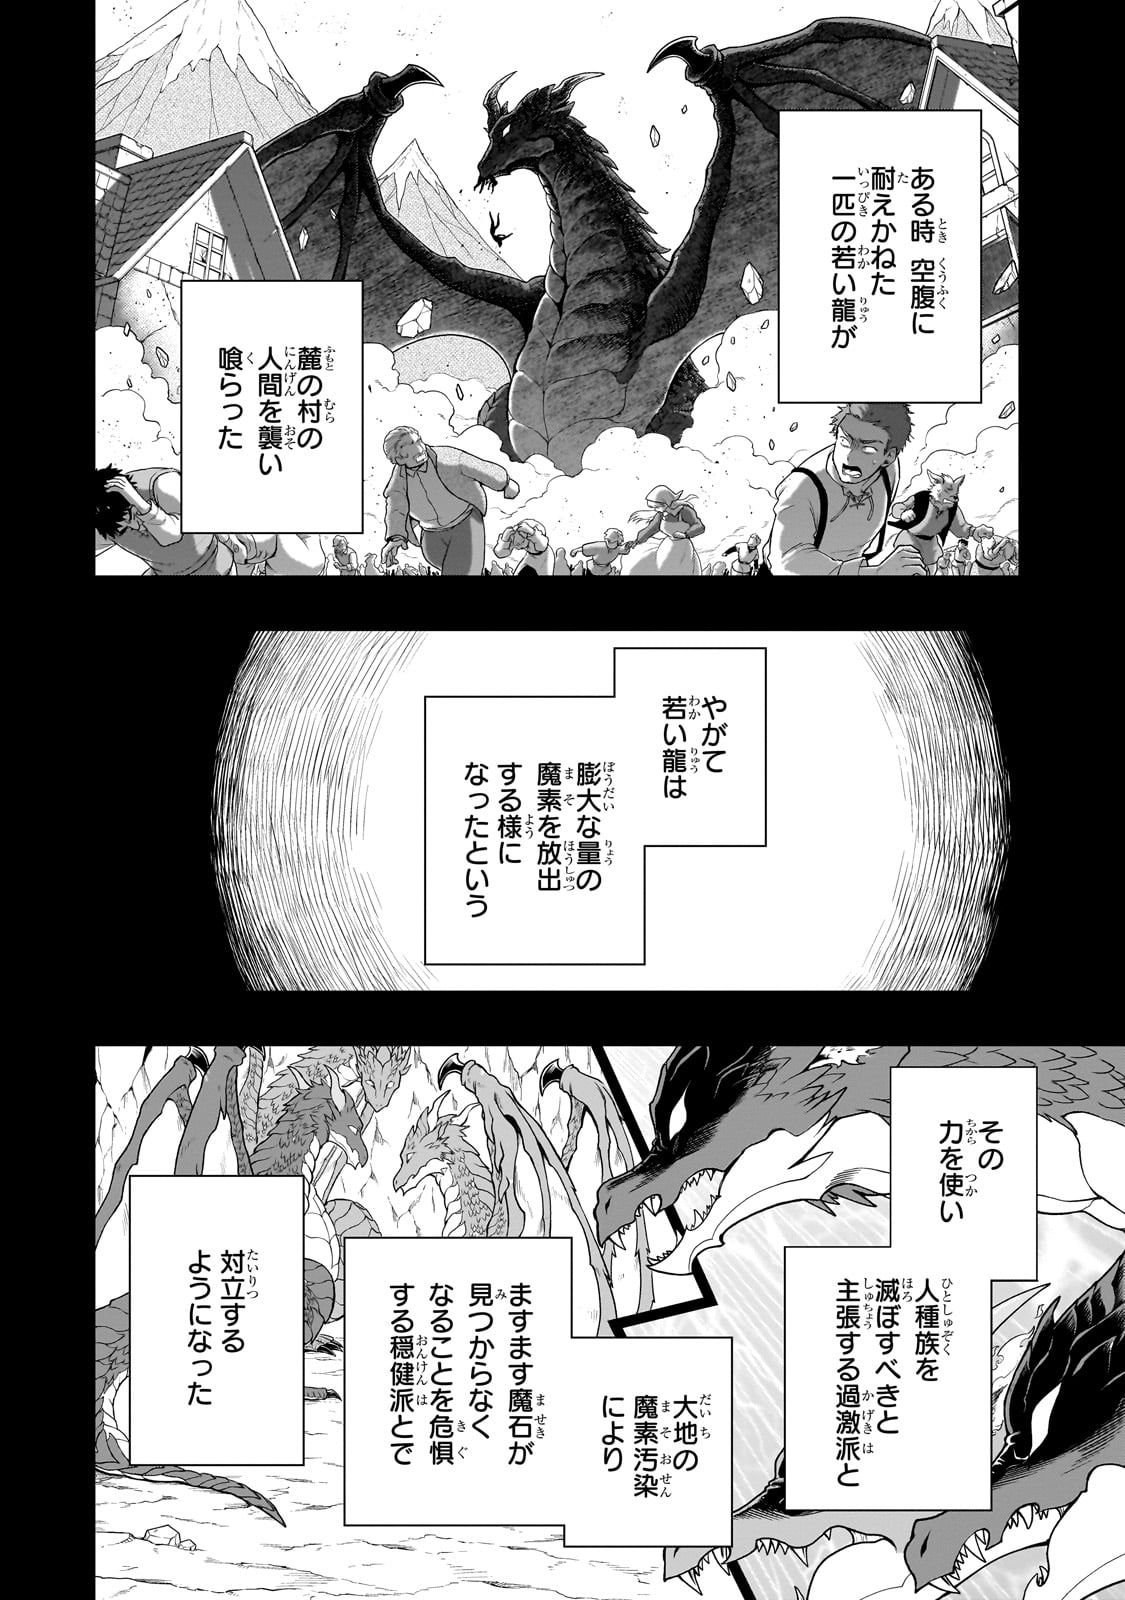 Ex-Hero Candidates, Who Turned Out To Be A Cheat From Lv2, Laid-back Life In Another World - Chapter 52 - Page 2